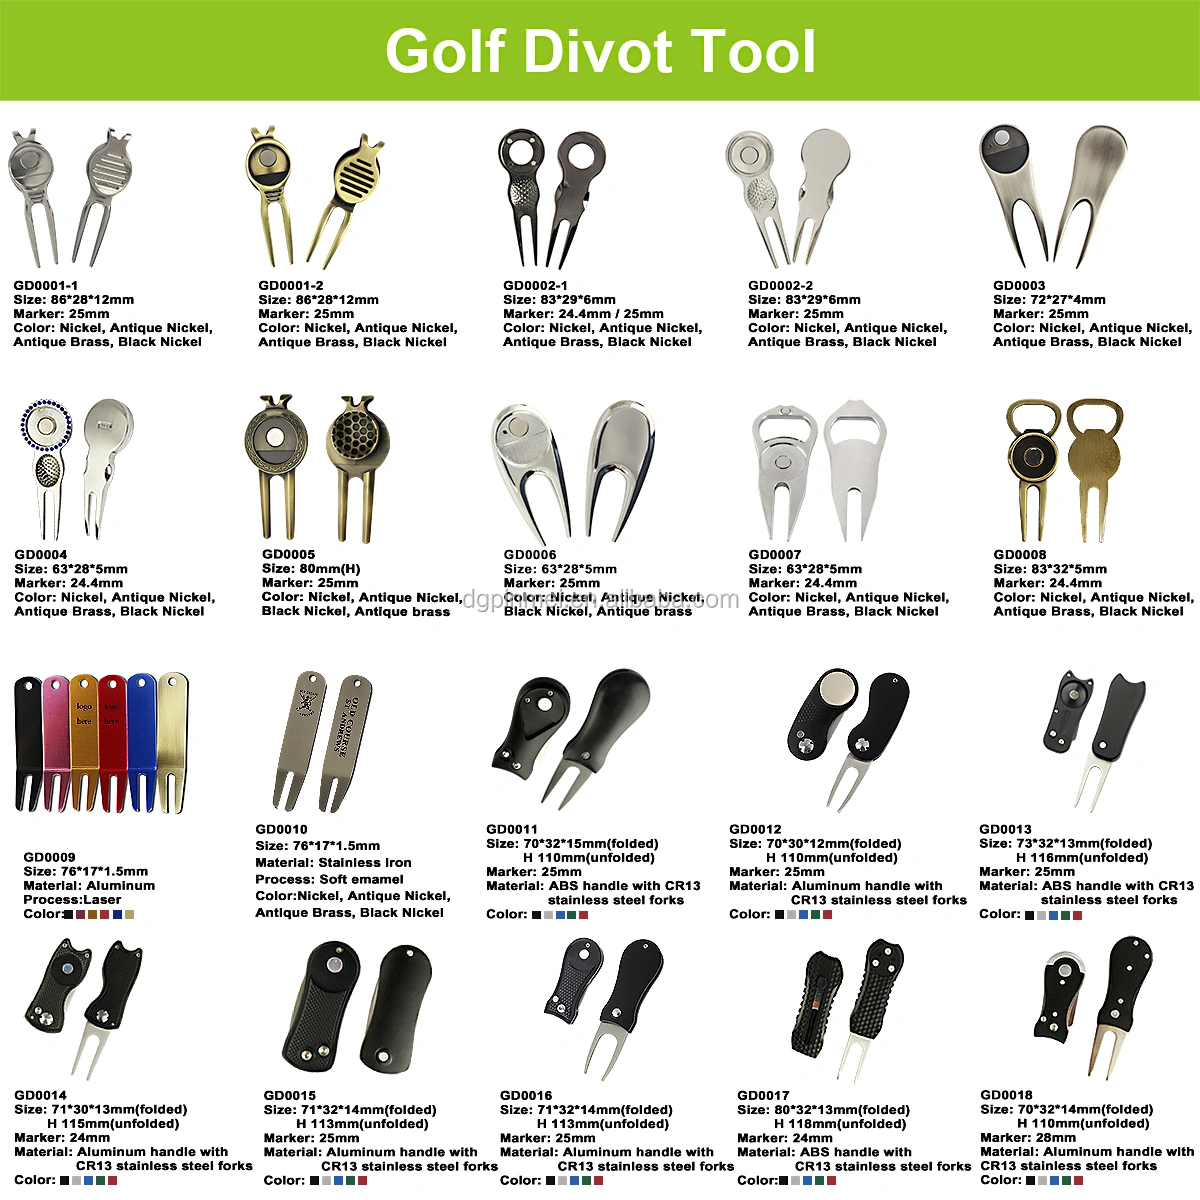 Personalized Promotional gifts golf design divot tools with ball marker including golf club repair tool with clover ball marker